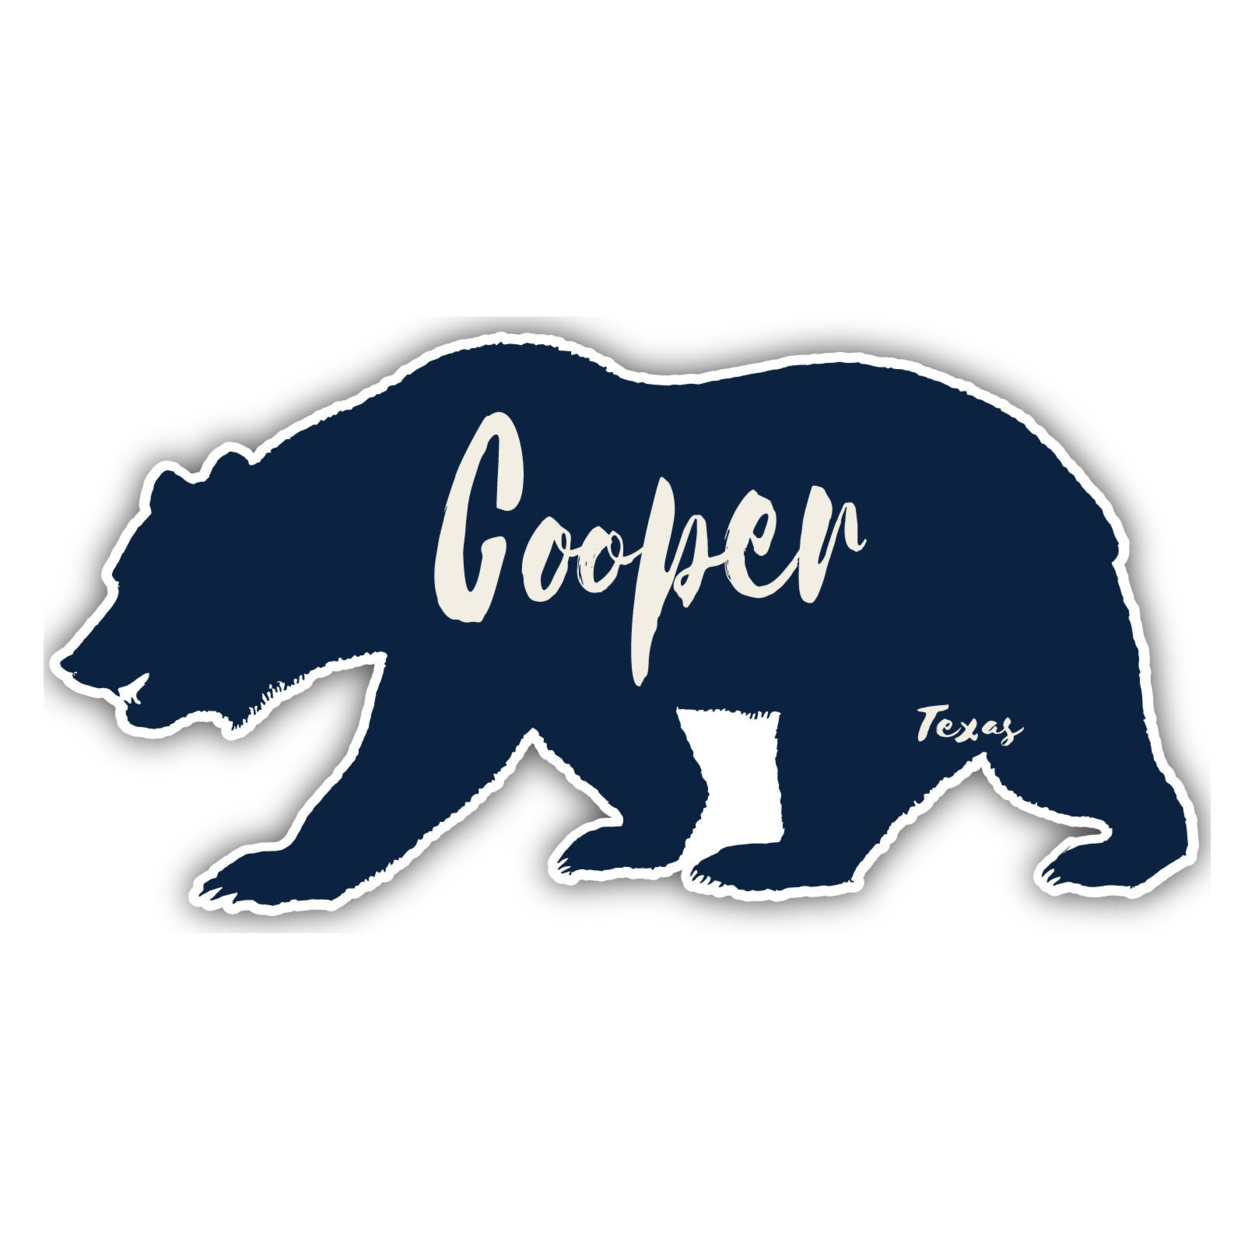 Cooper Texas Souvenir Decorative Stickers (Choose Theme And Size) - 4-Pack, 12-Inch, Bear